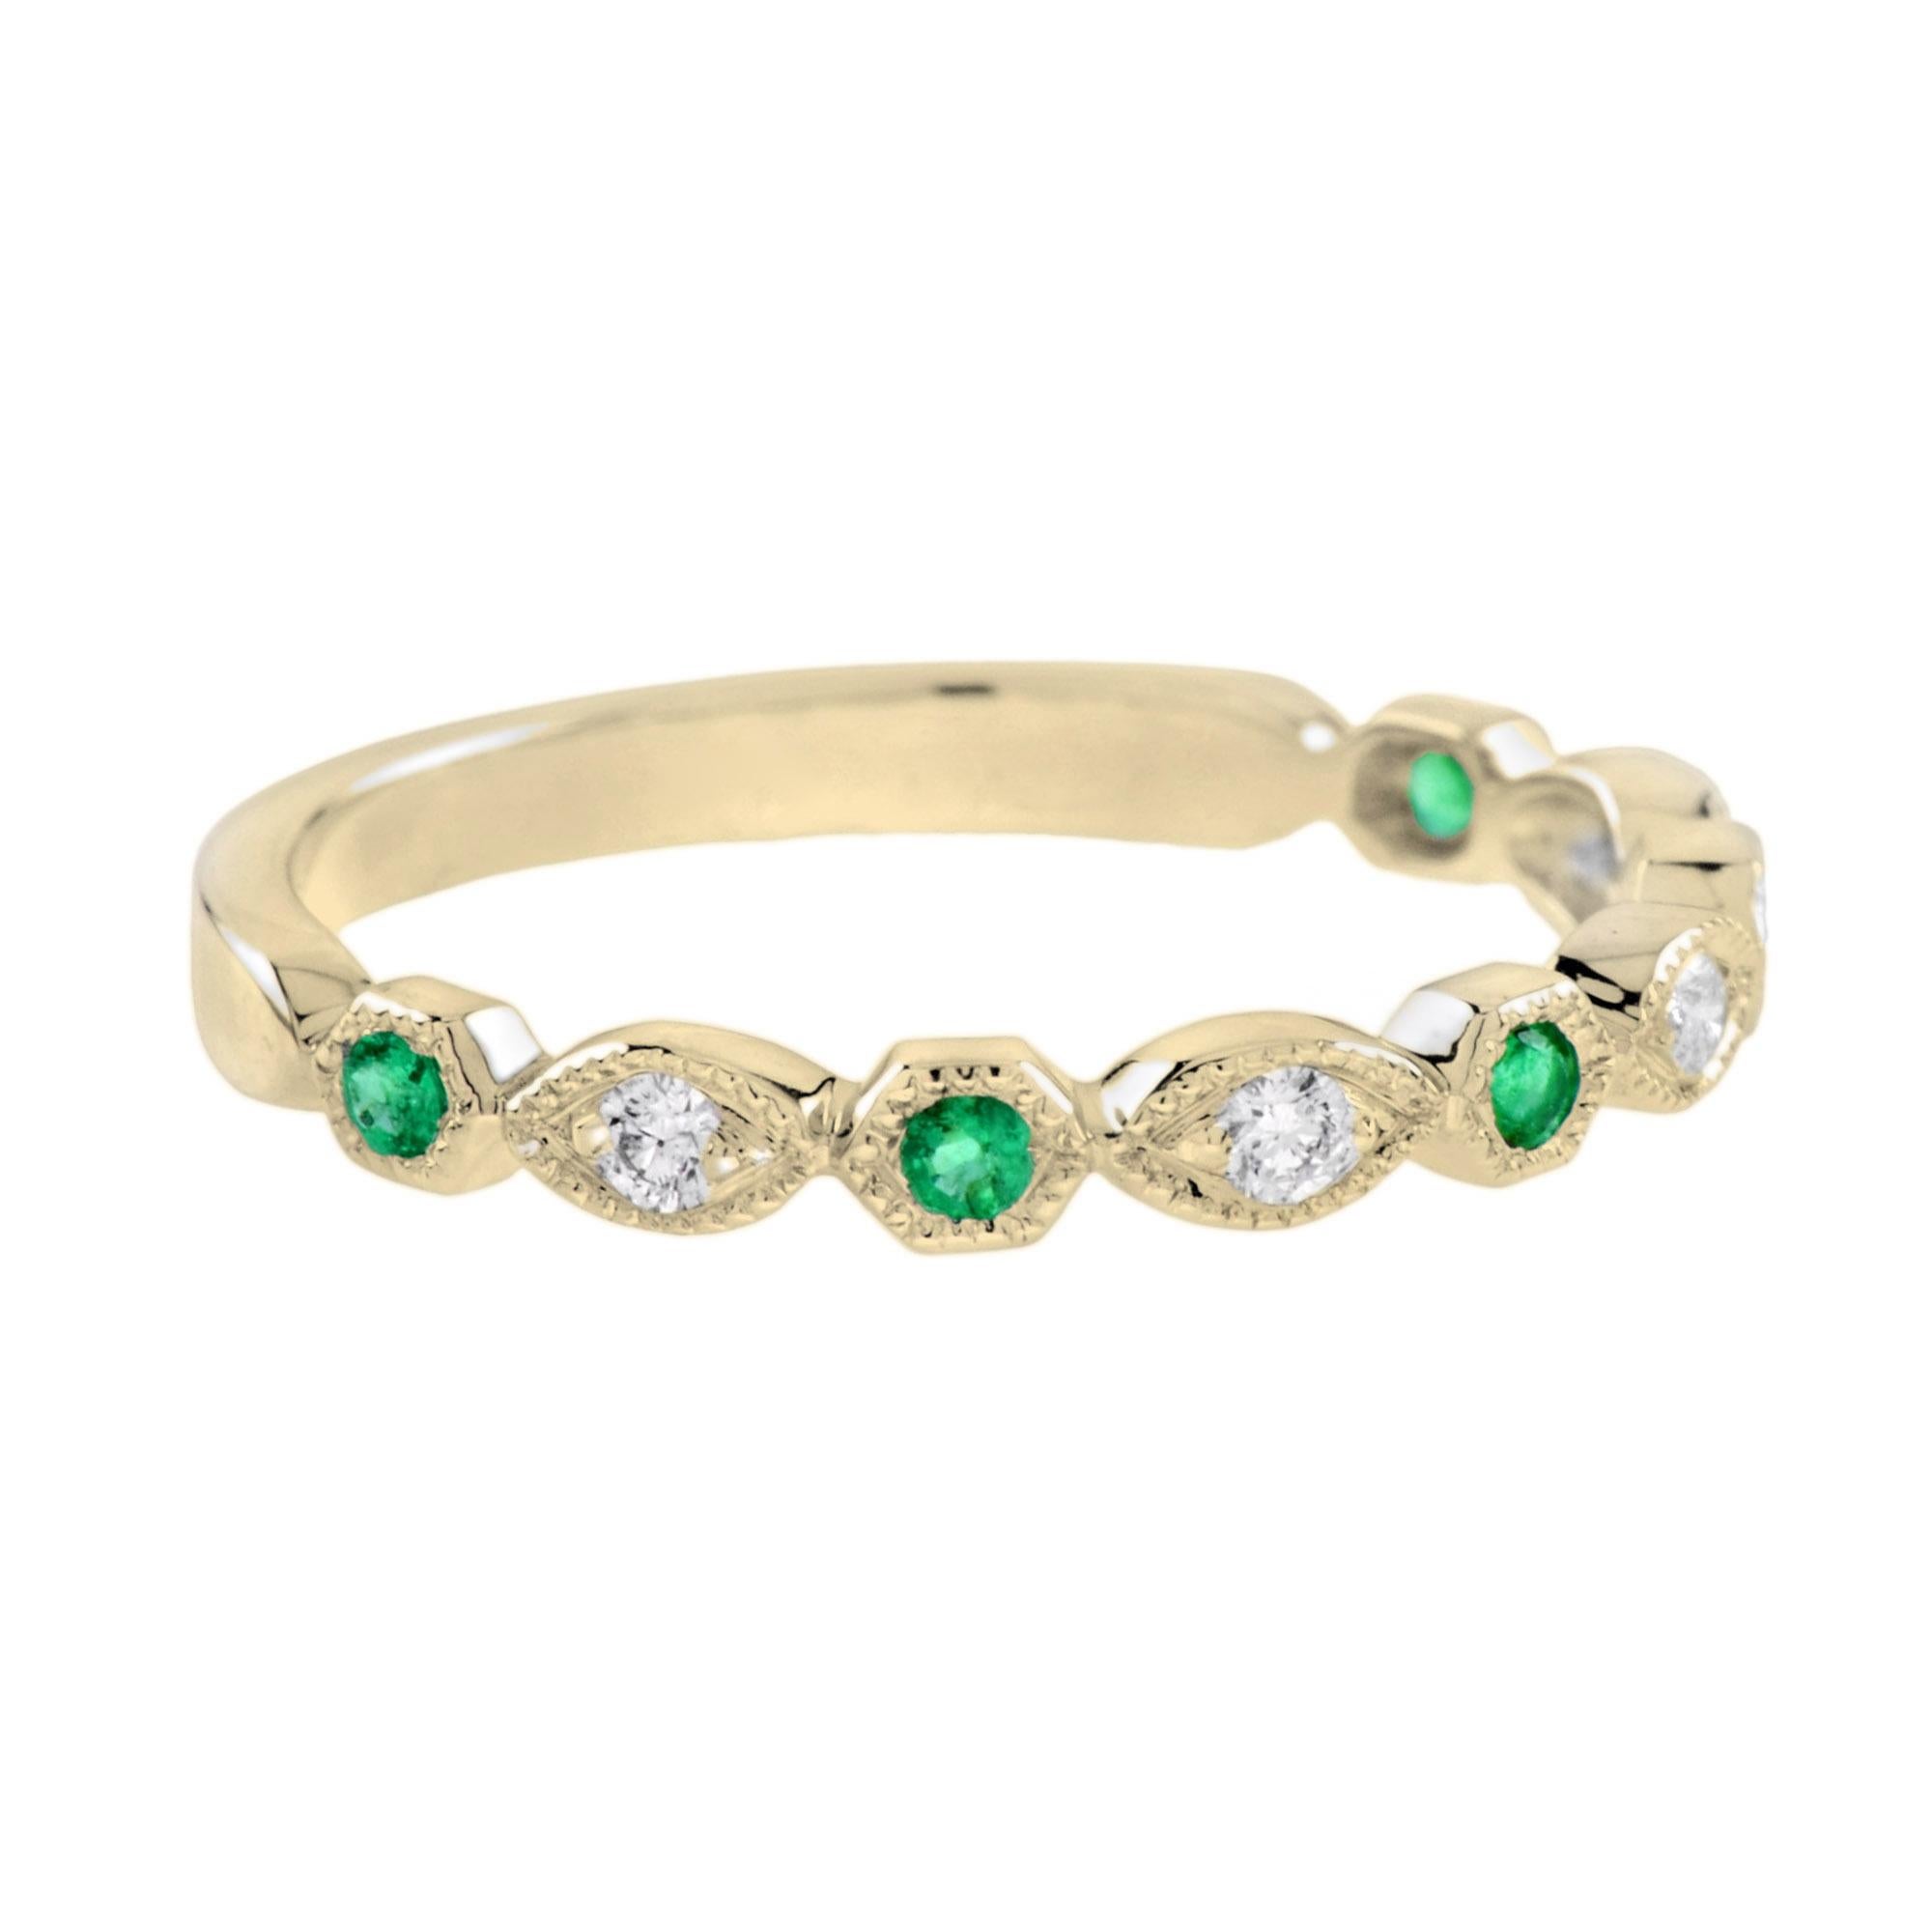 For Sale:  Emerald and Diamond Vintage Style Half Eternity Band Ring in 14K Yellow Gold 2